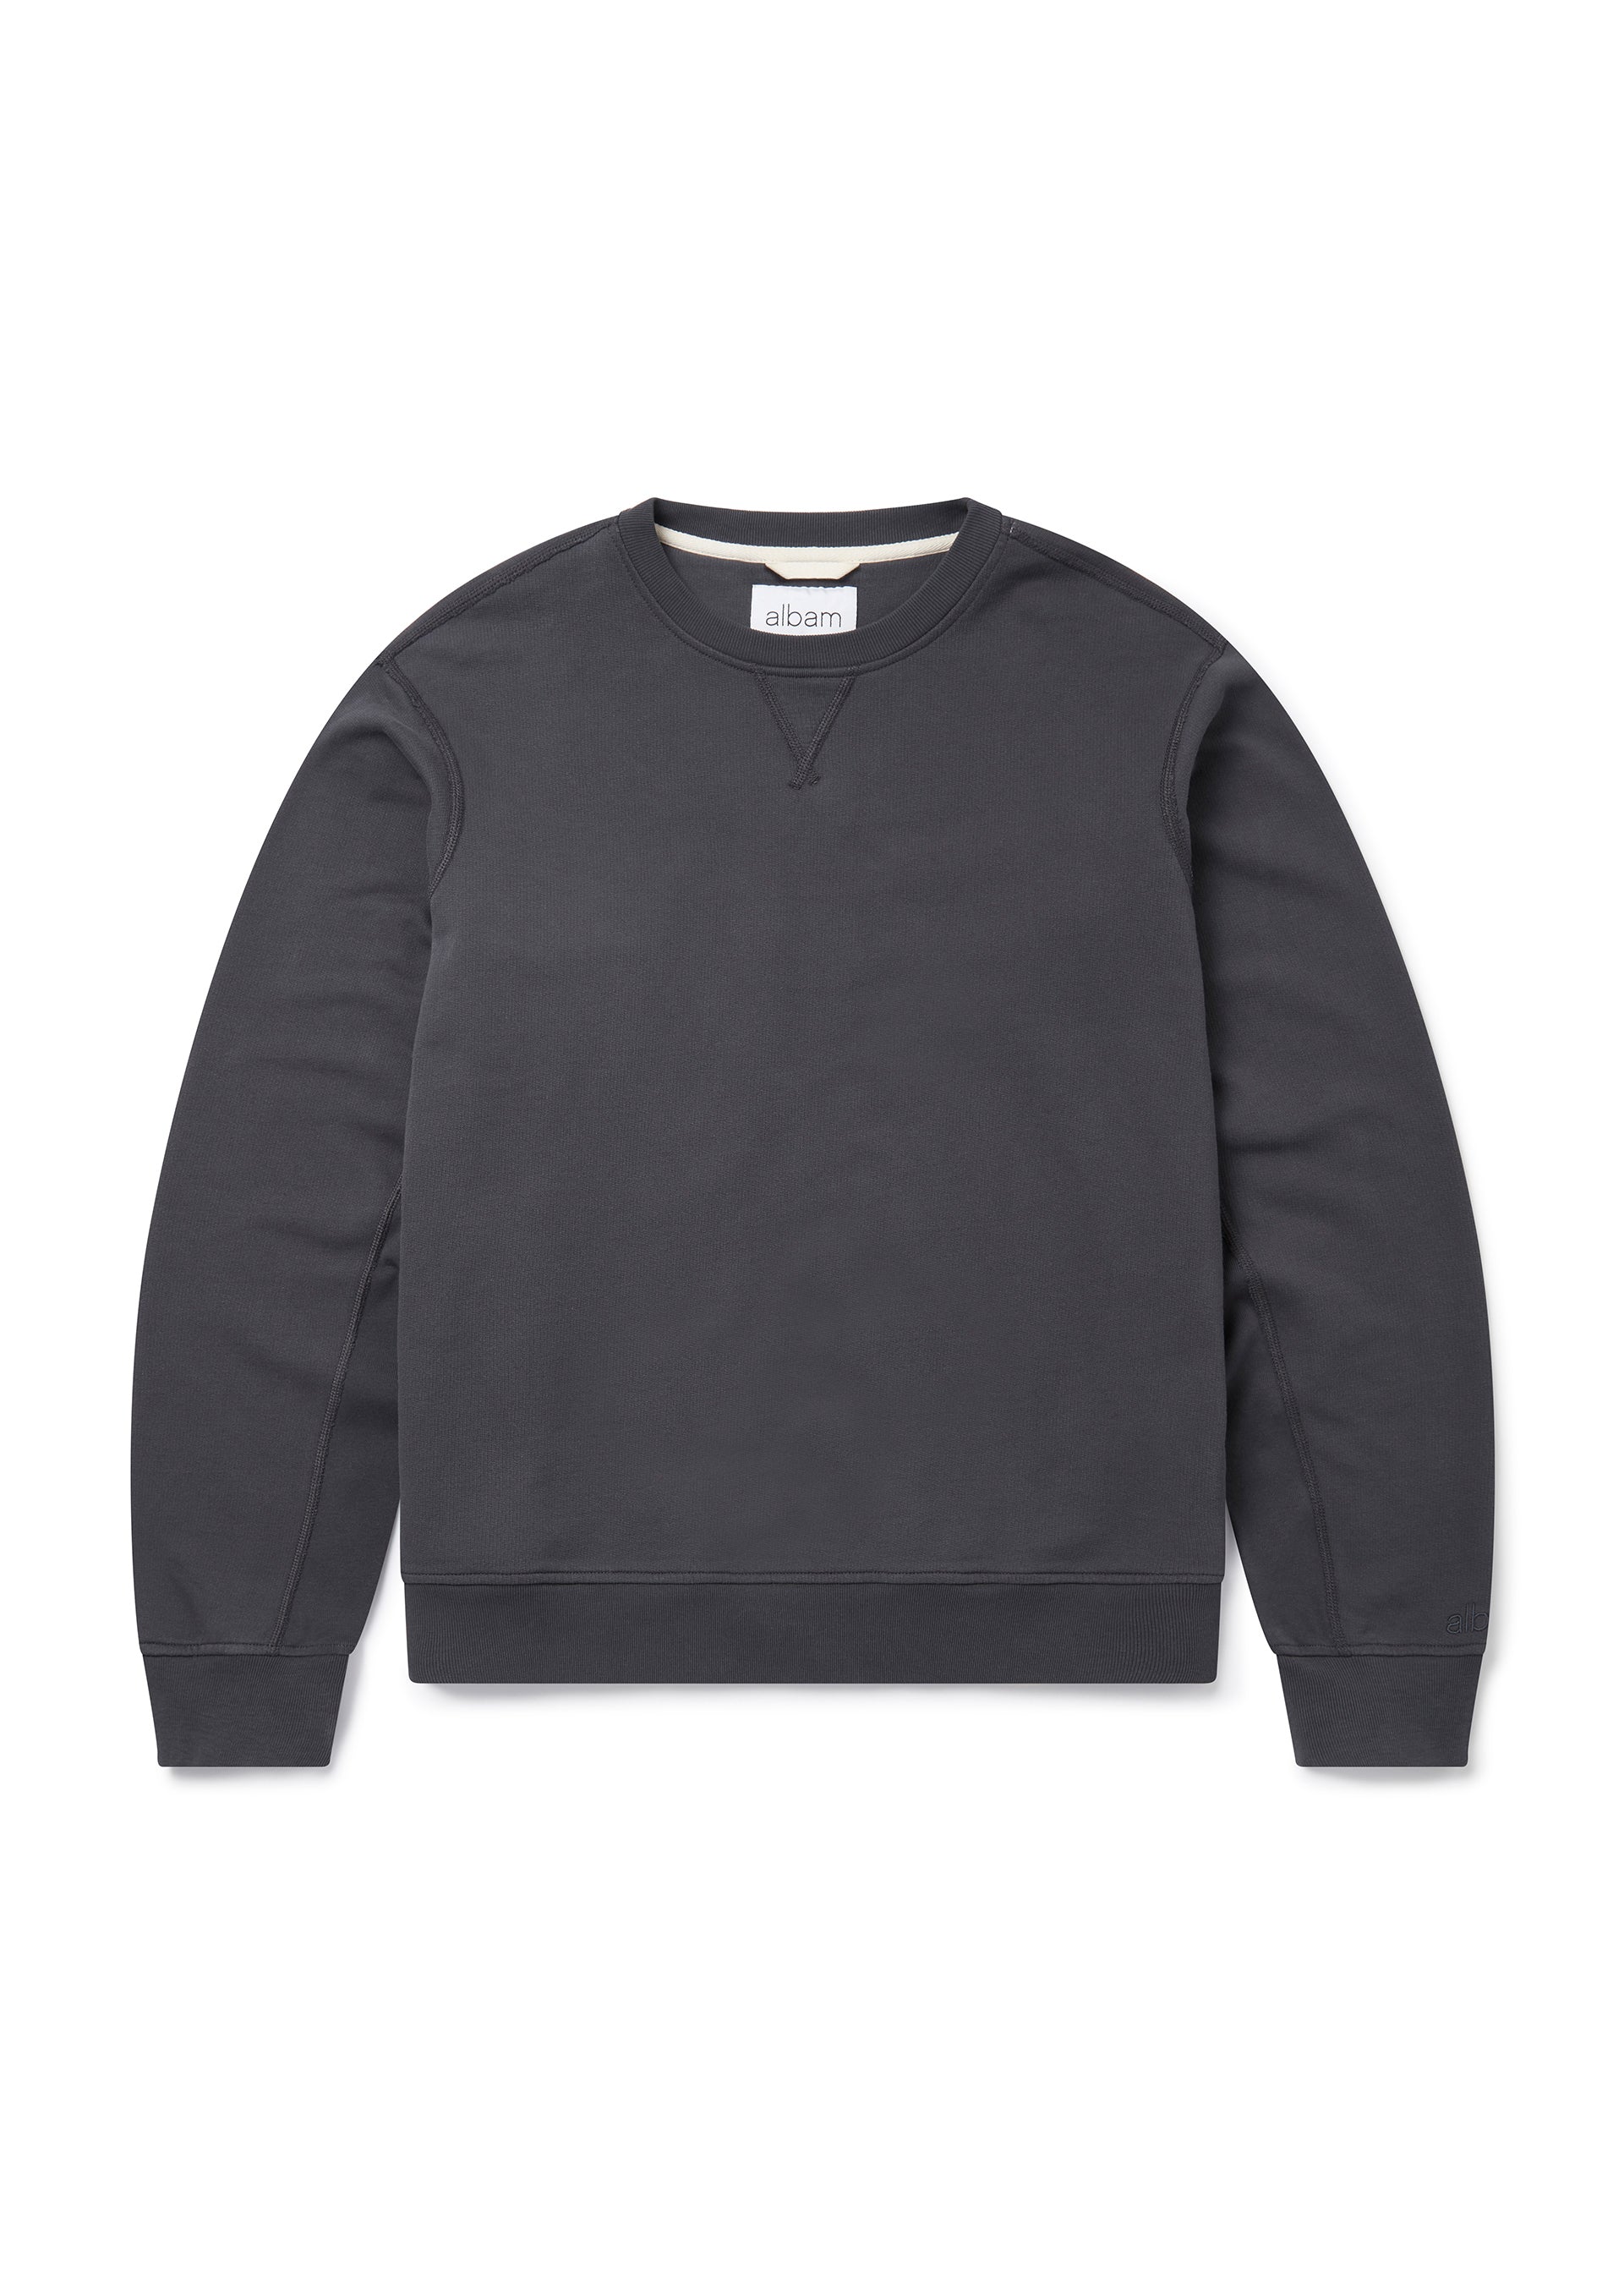 Classic Sweat in Charcoal – albam Clothing